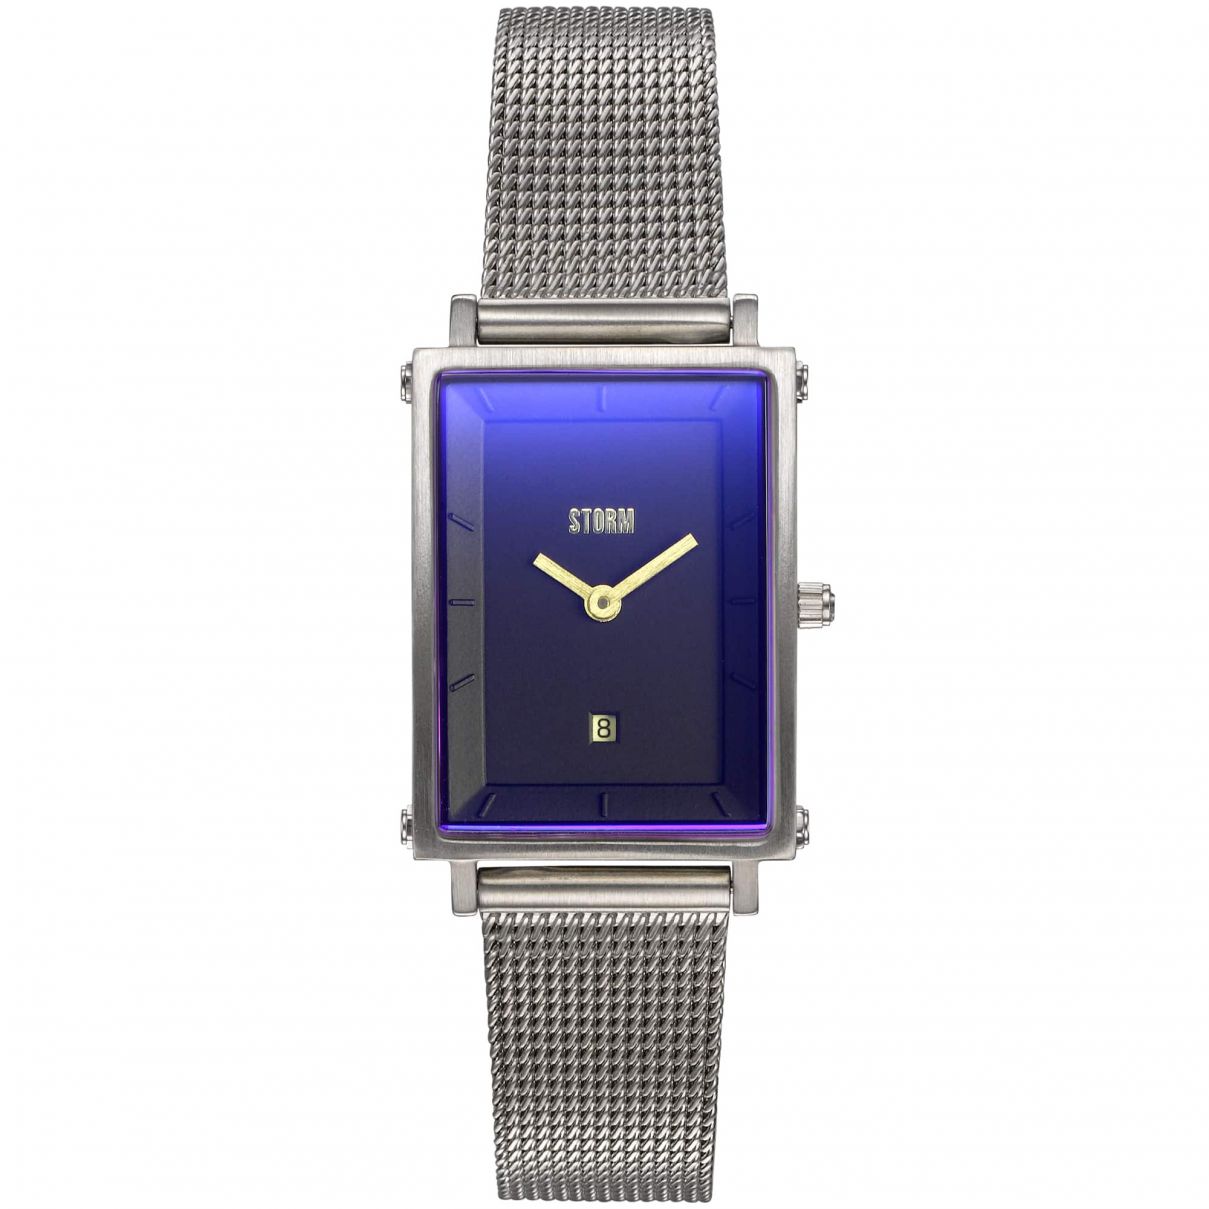 Storm Issimo Ladies Watch in Lazer Blue Watches Storm London 